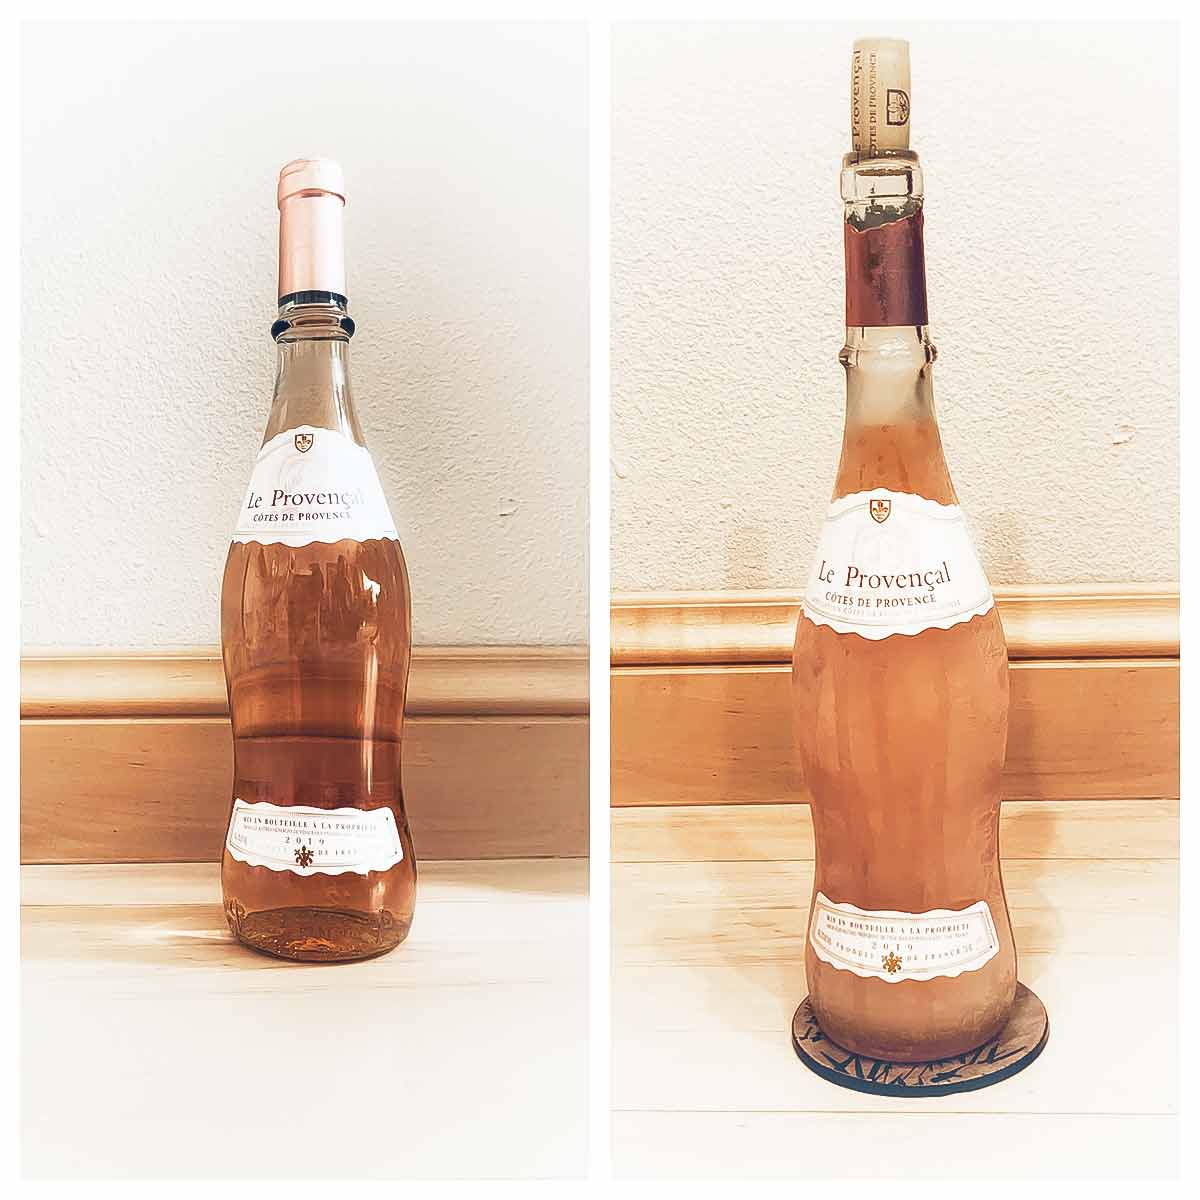 An image of a bottle of rose next to it transformed into a bottle of frose.